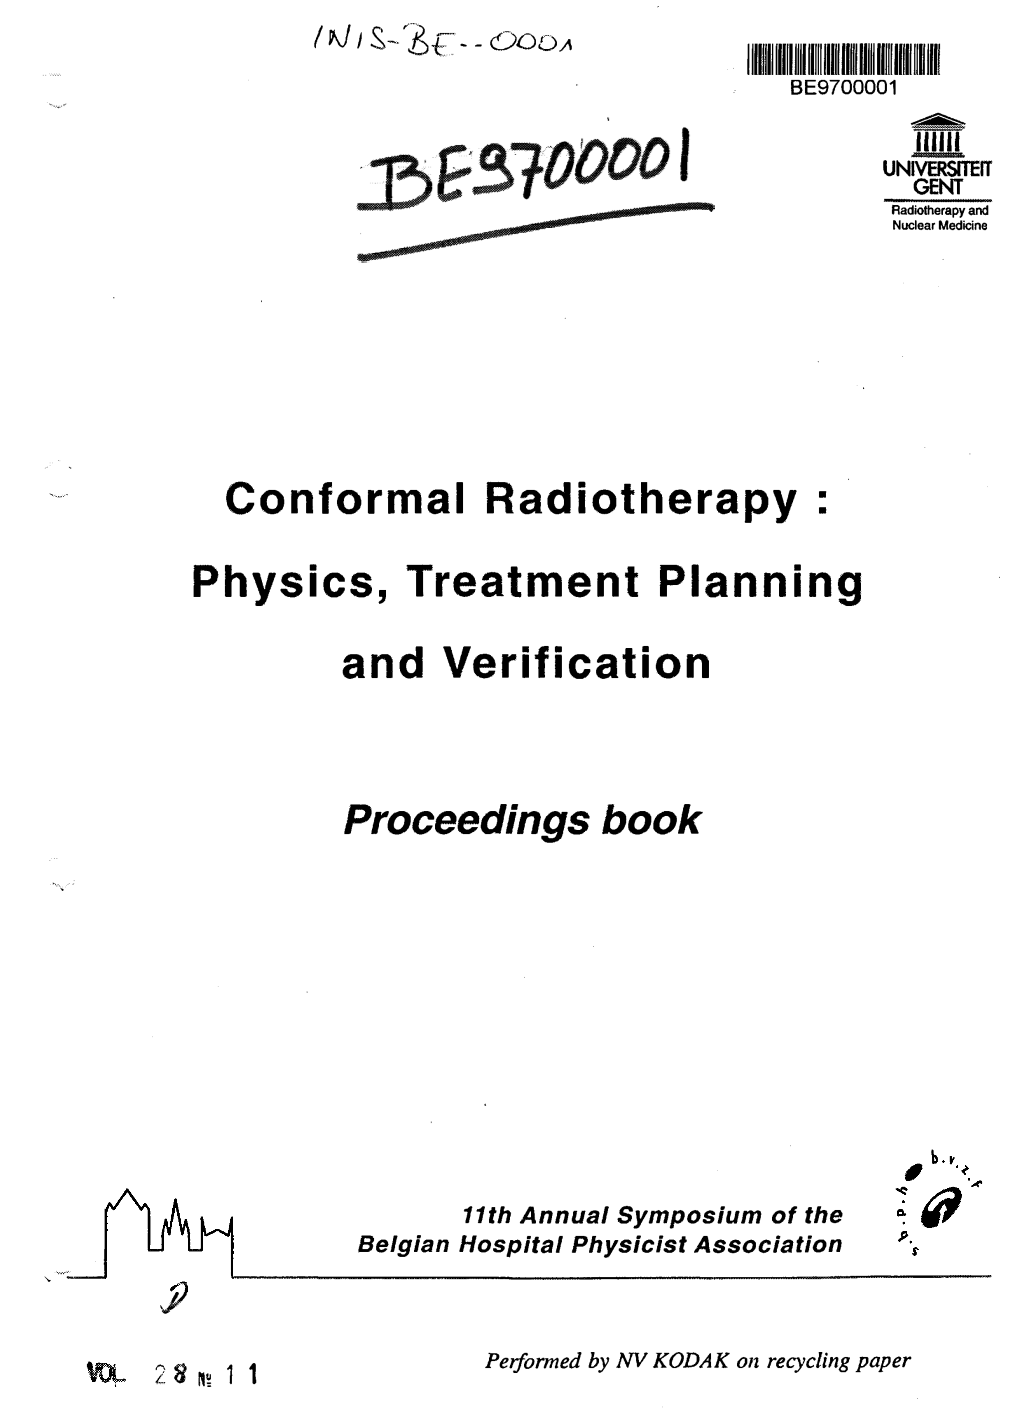 Conformal Radiotherapy : Physics, Treatment Planning and Verification